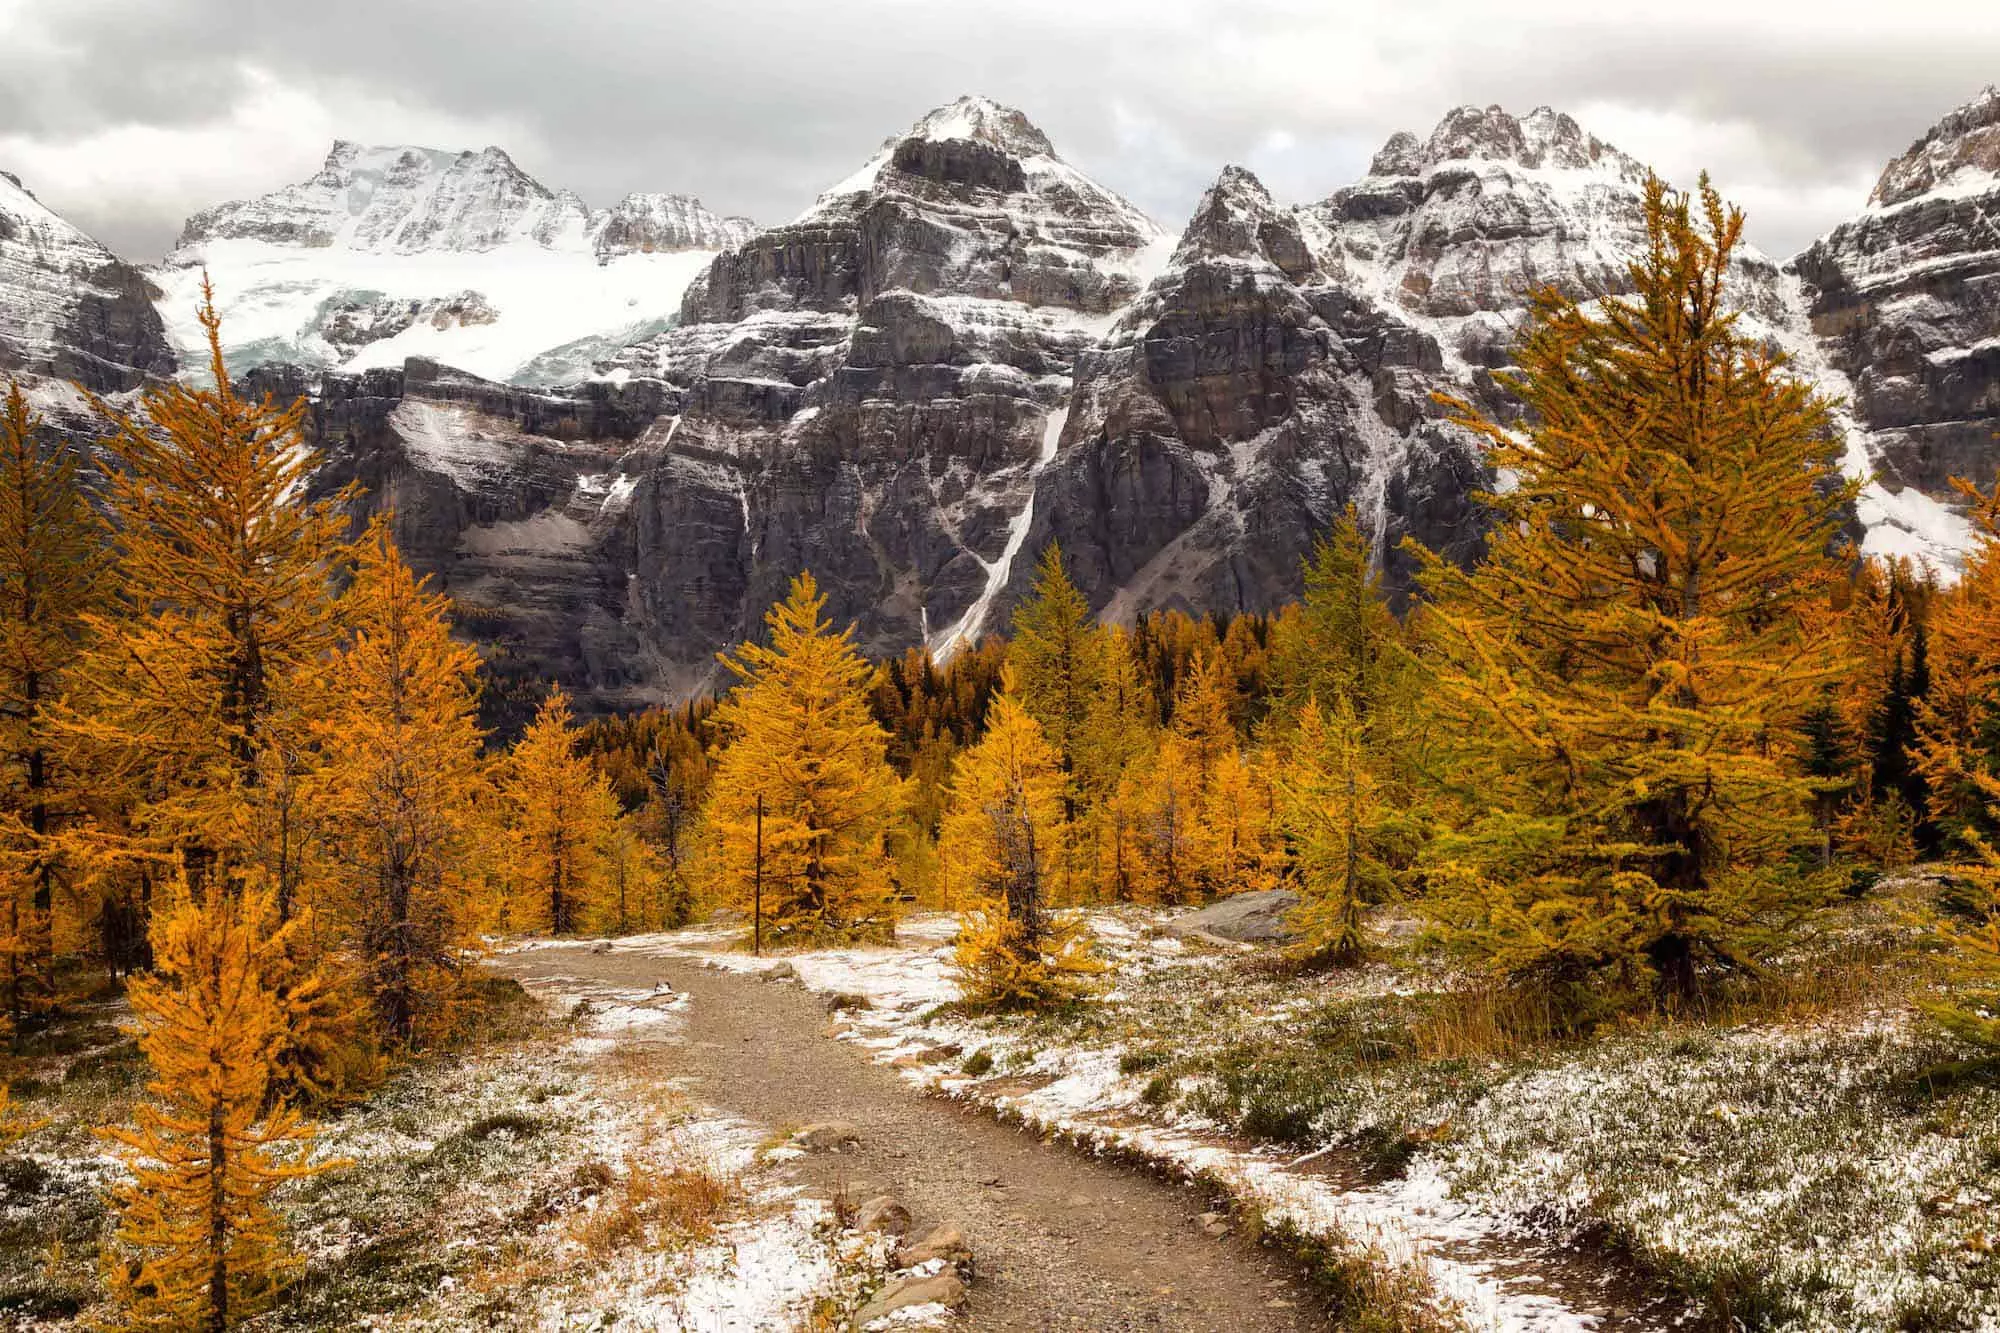 Larch Tree Valley Trek in Canada, North America | Trekking & Hiking - Rated 4.1